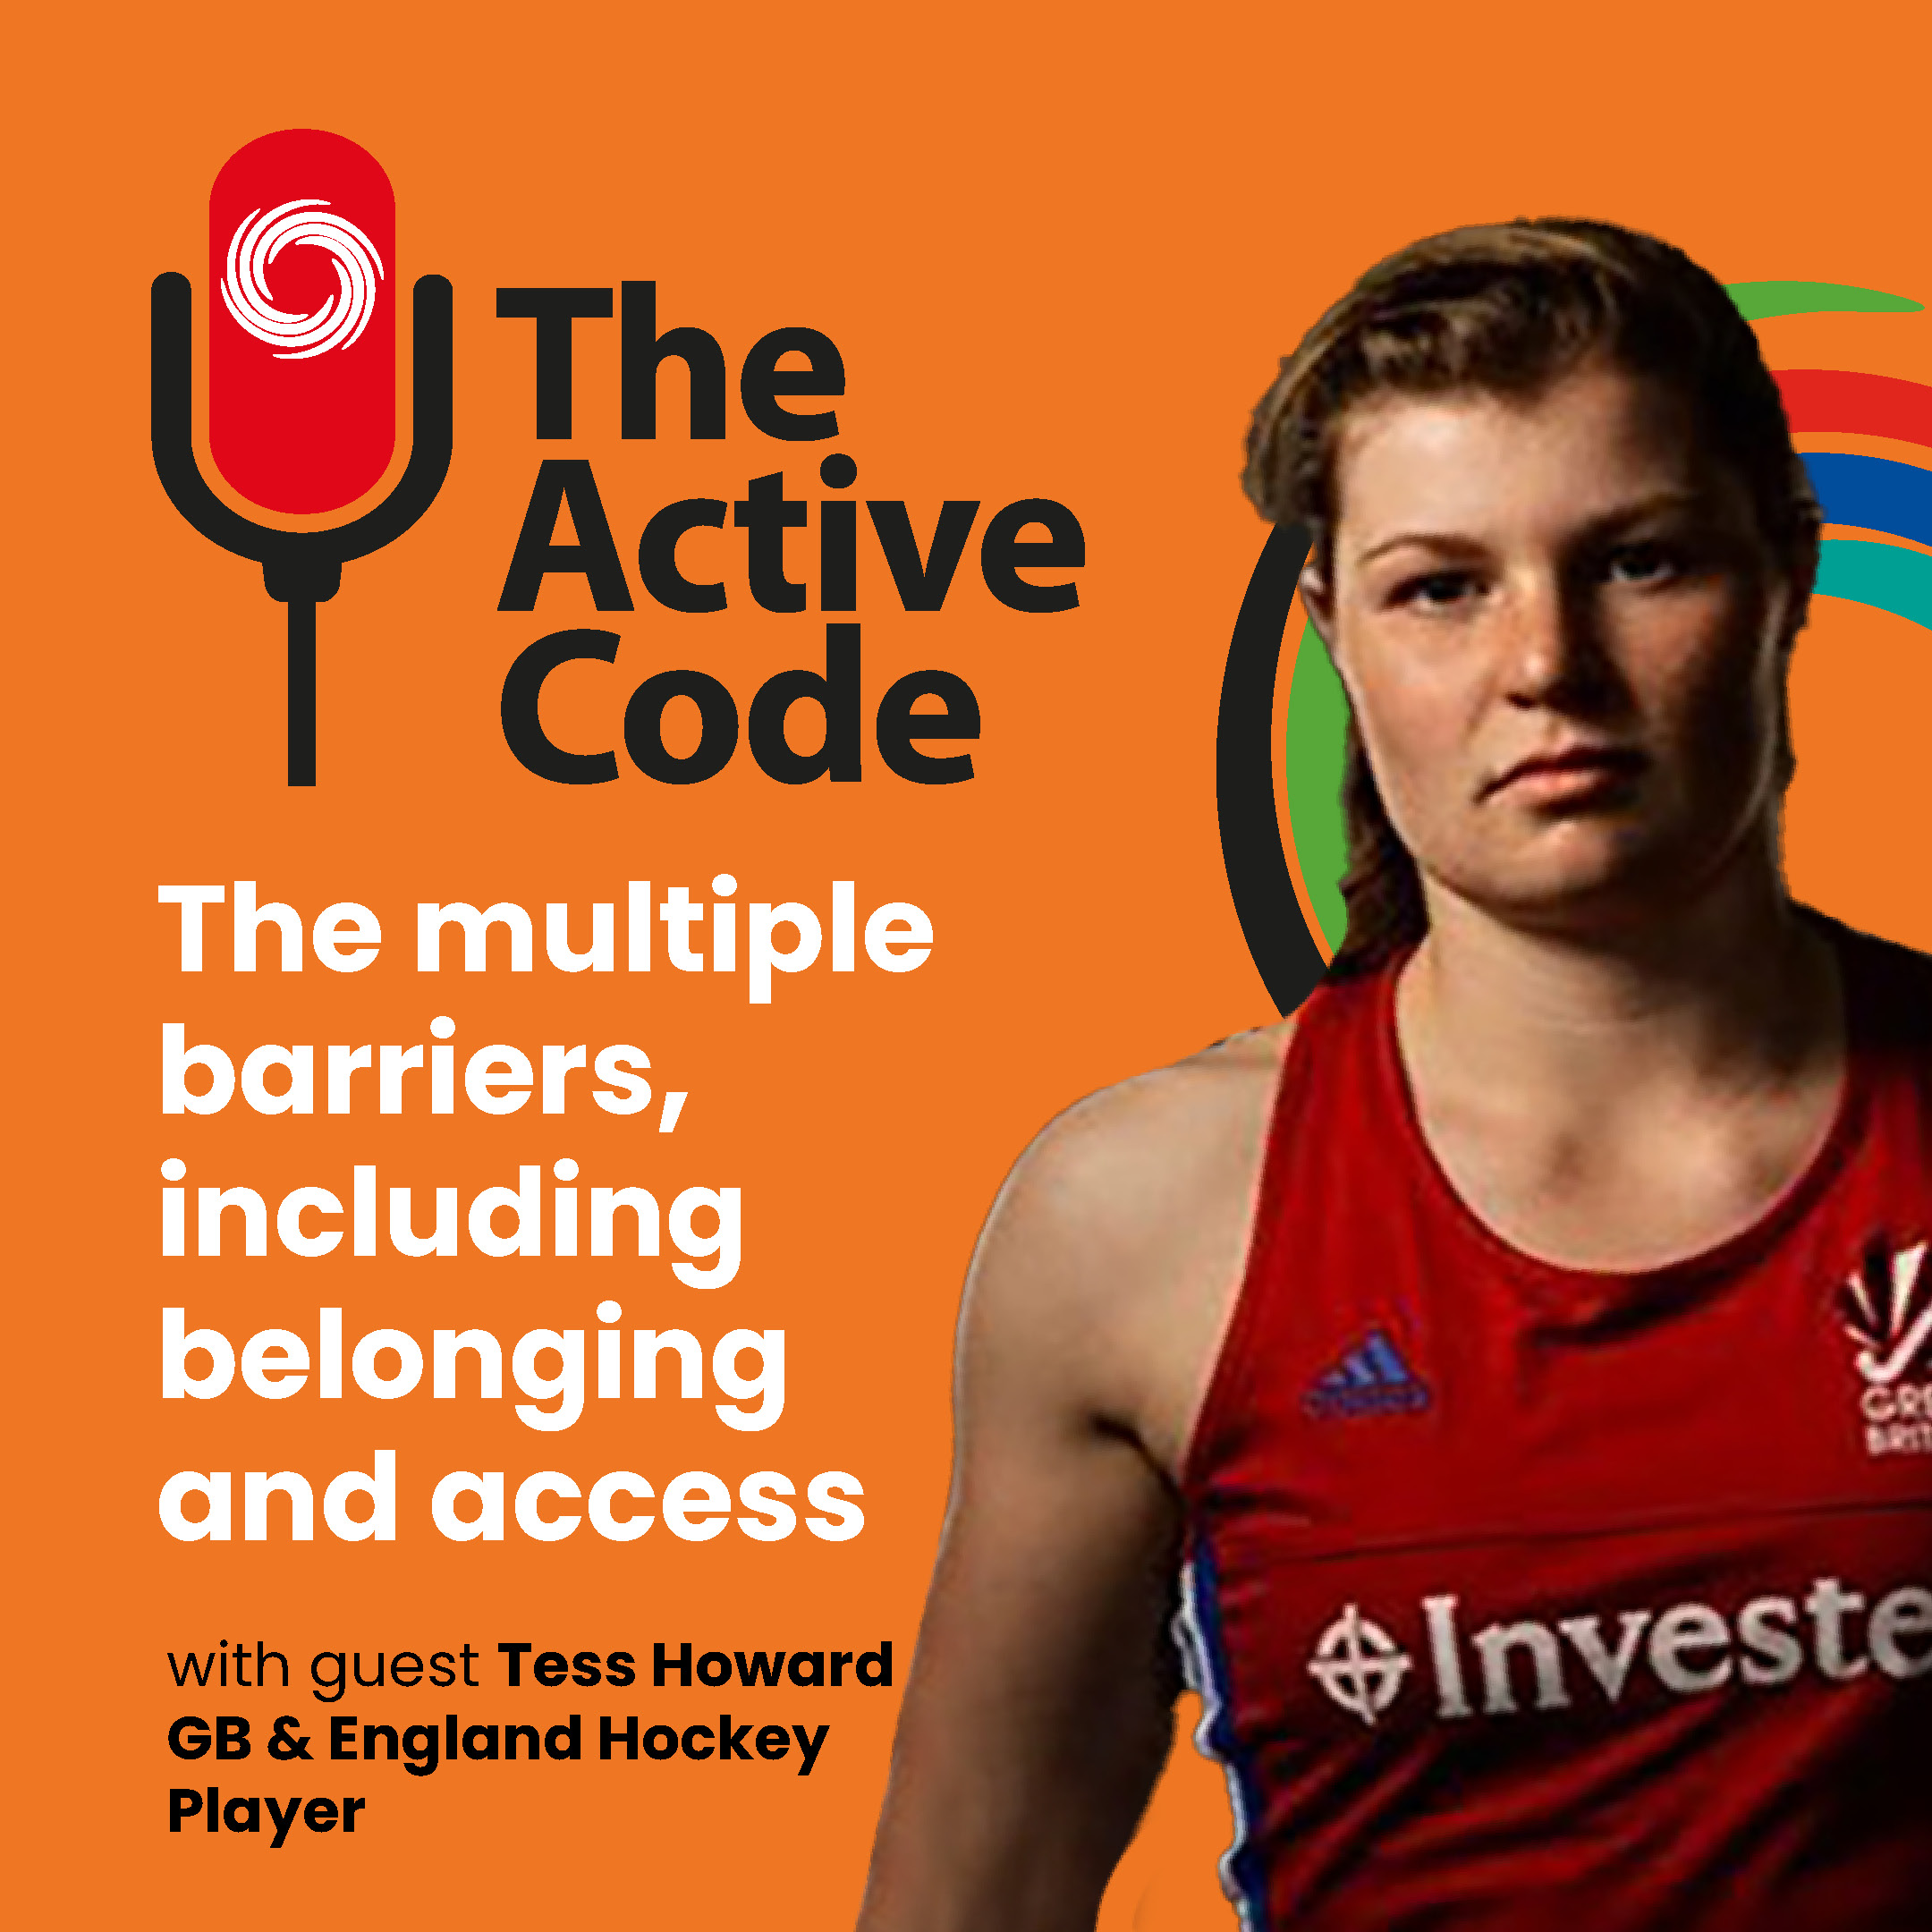 The Active Code – The multiple barriers, including belonging and access